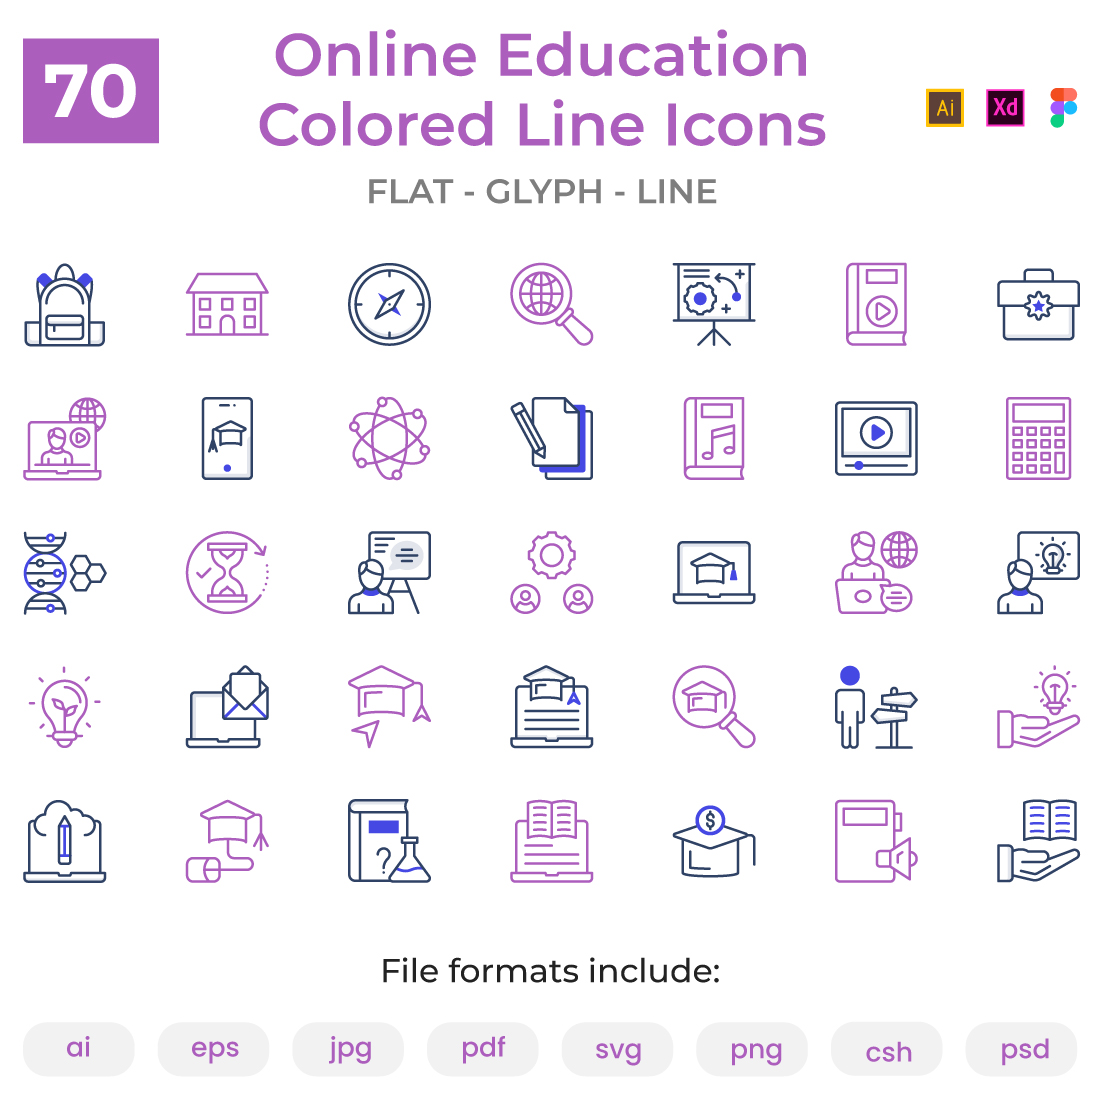 Online Education and Learning Colored Line Icons cover image.